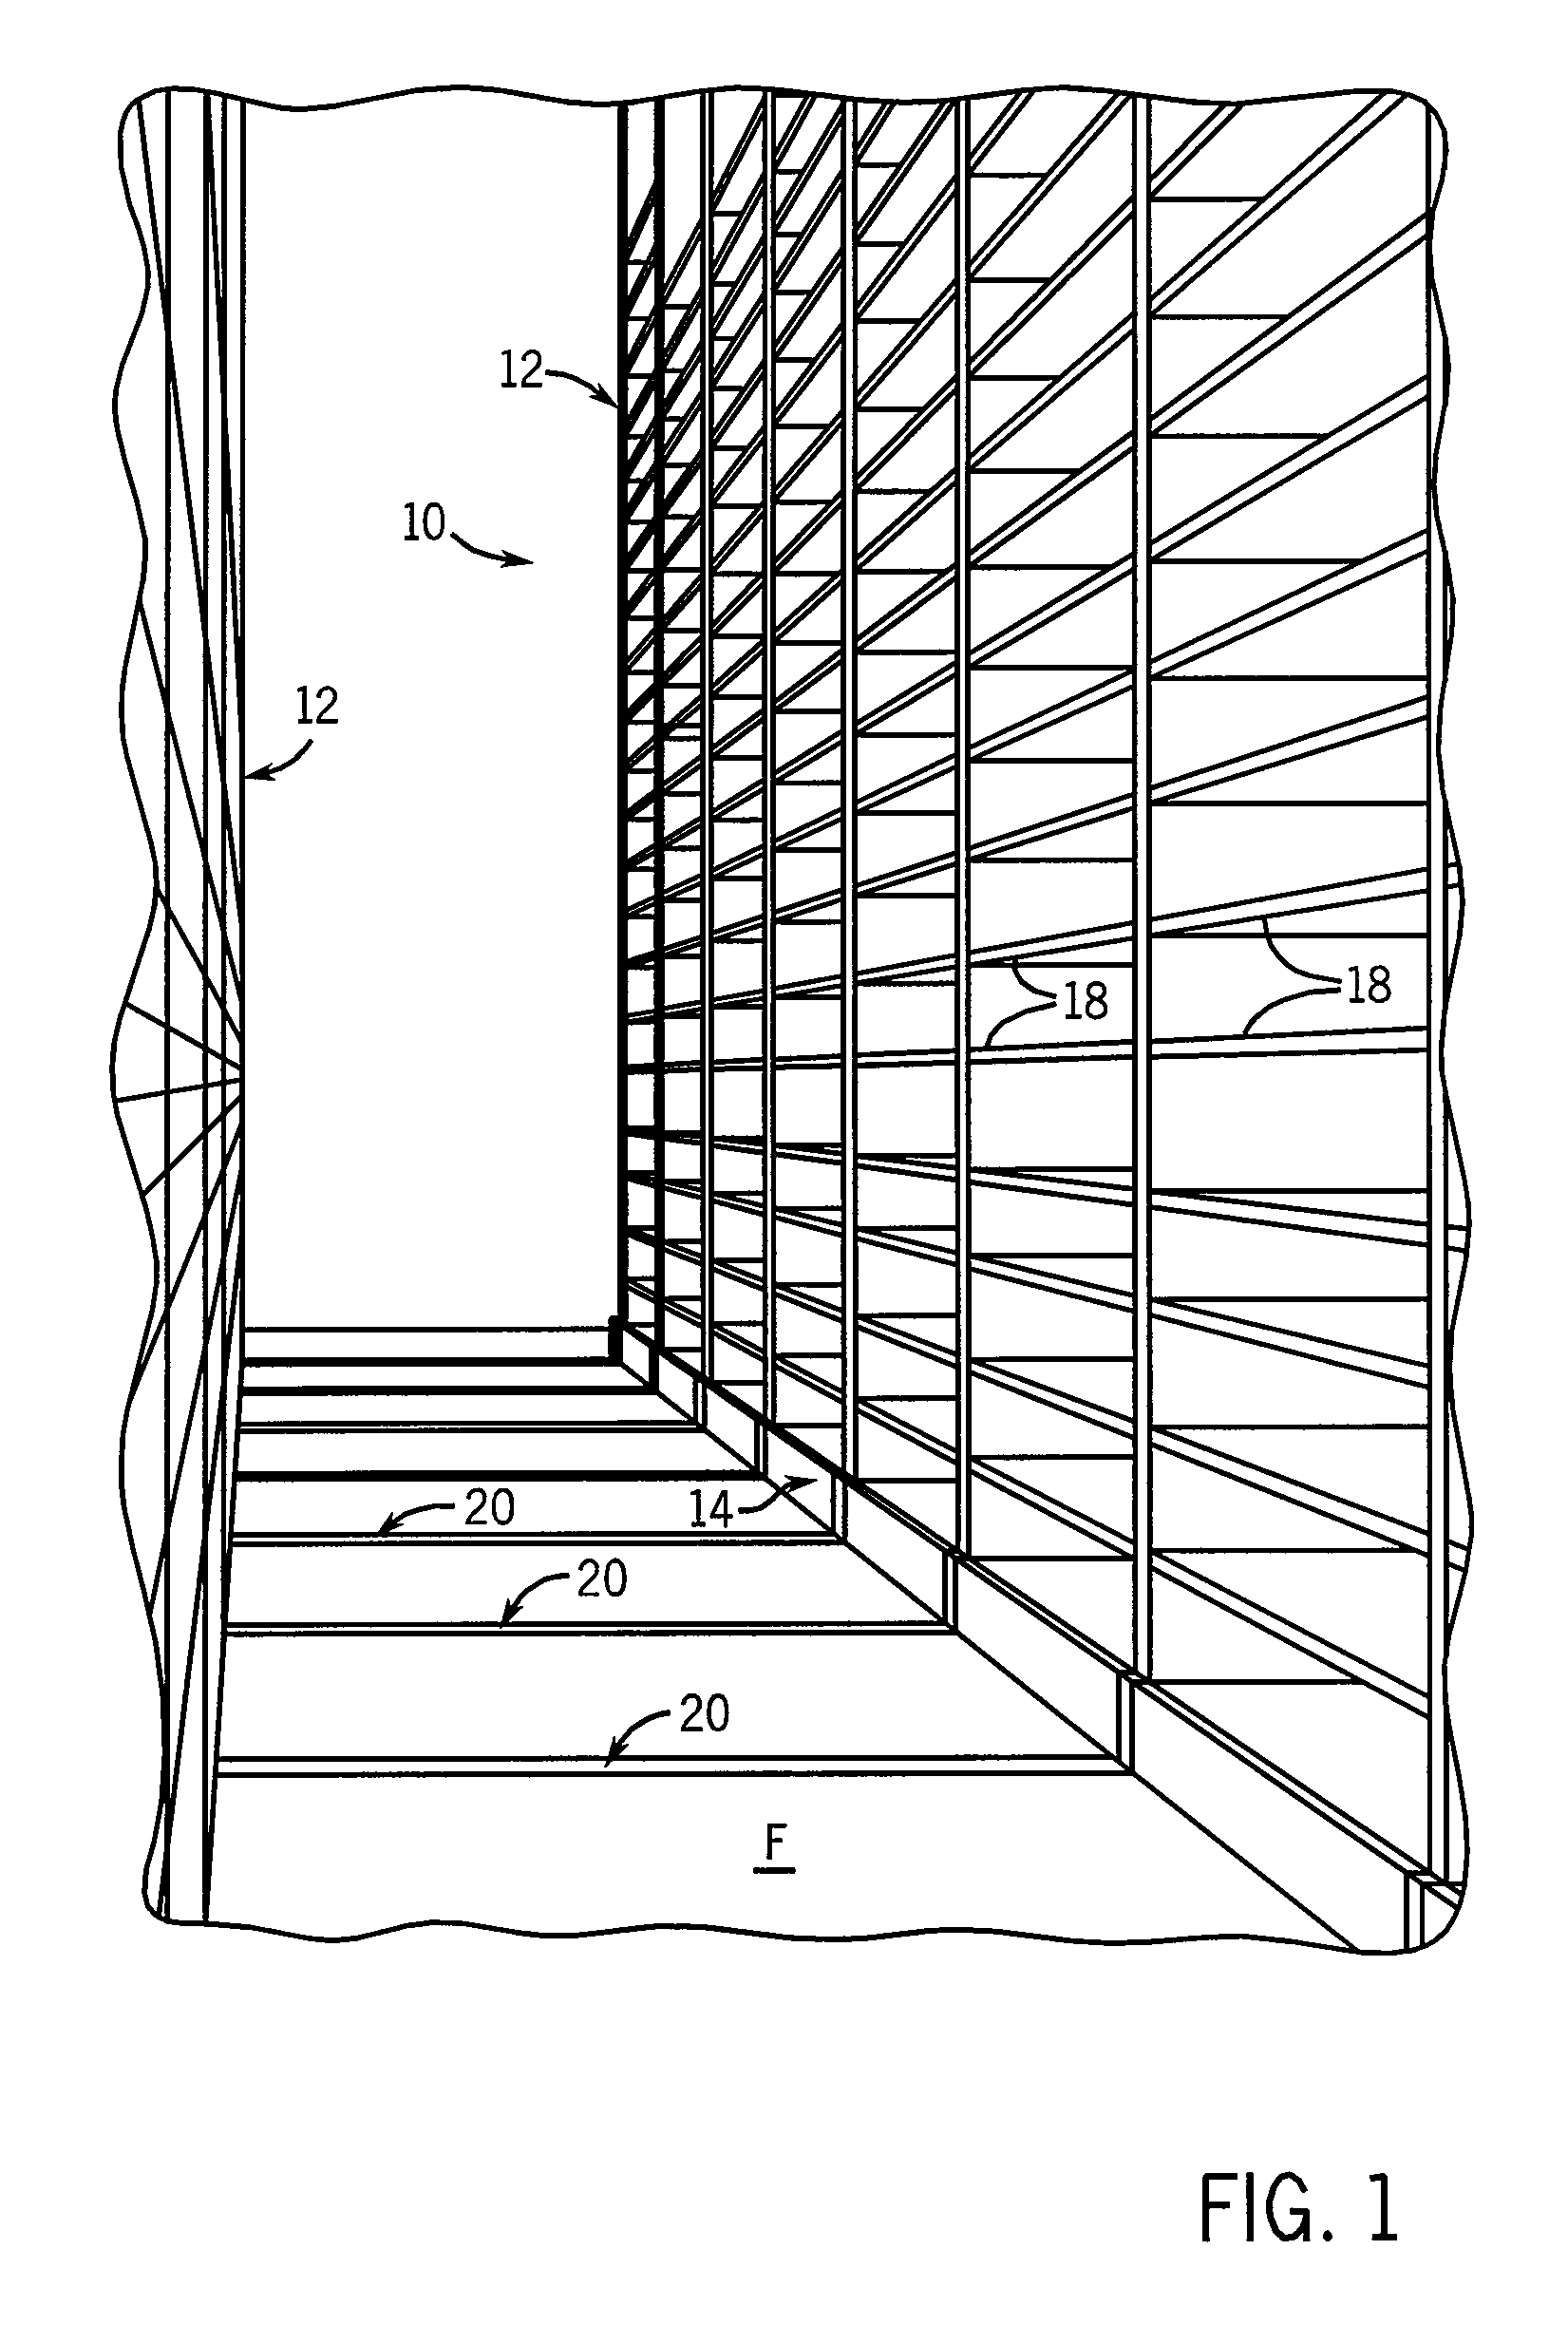 Mobile high bay storage system having vehicle guidance system